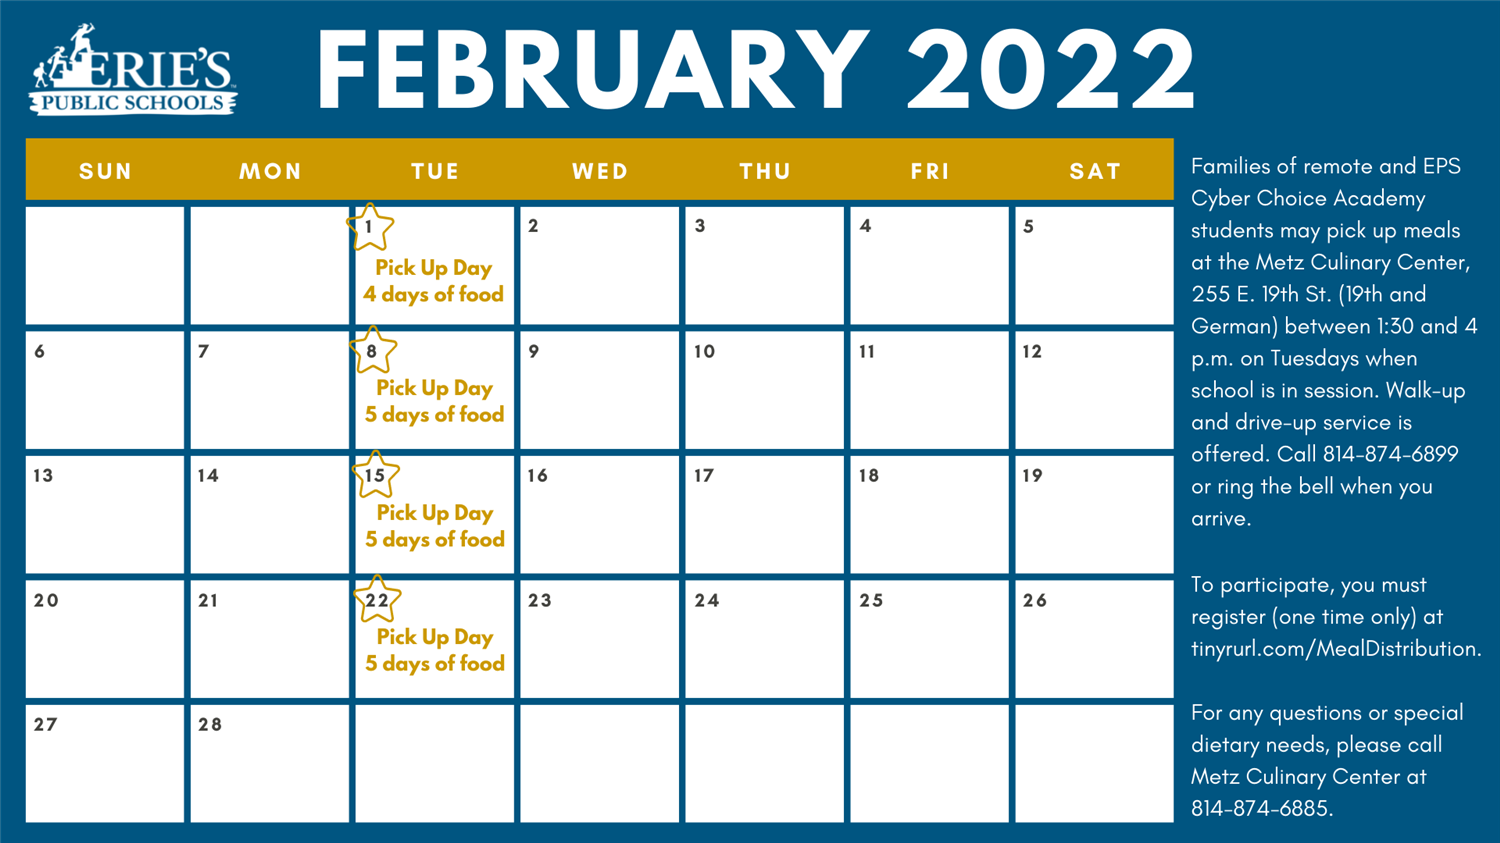 Meal distribution calendar for February with pick up dates on Feb. 1, 8, 15 and 22. Call 814-874-6899 for info.